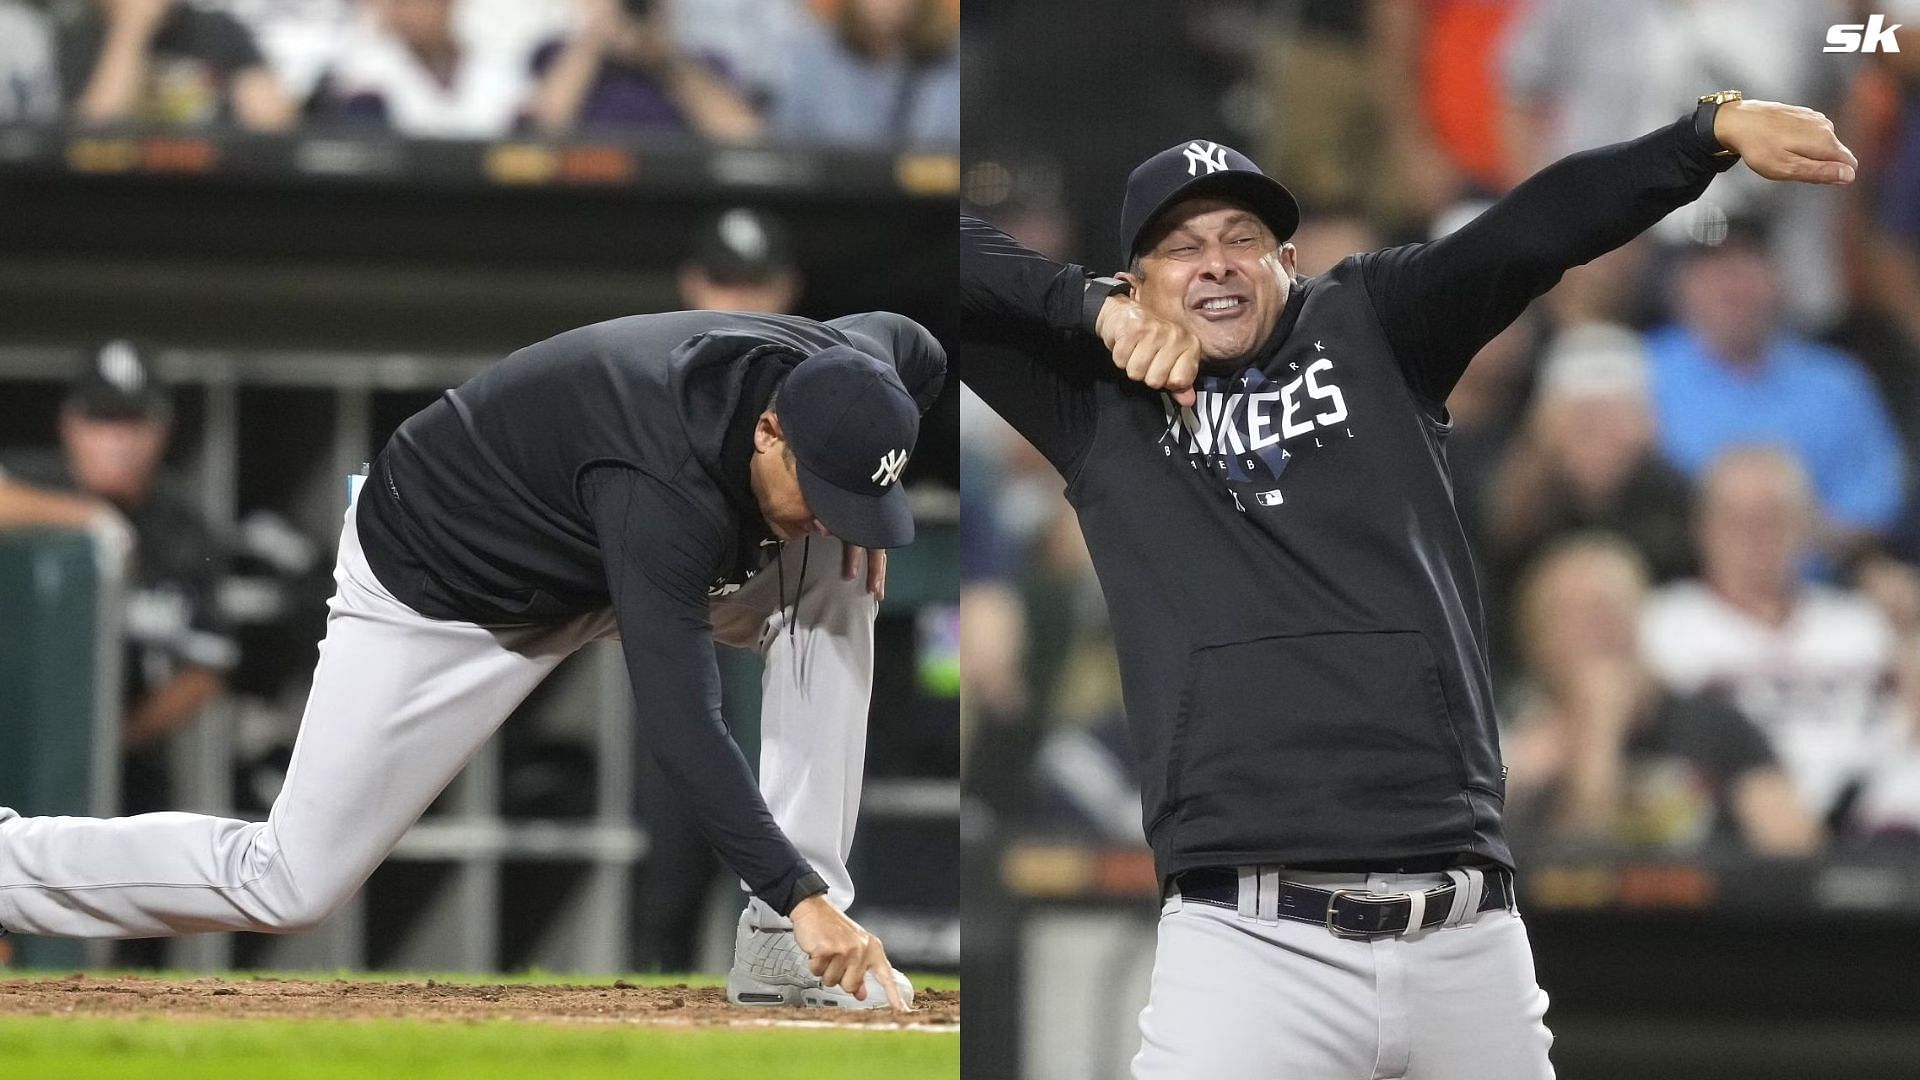 Aaron Boone brought out the hilarious acting during his feud with umpire Laz Diaz in the game against the White Sox.